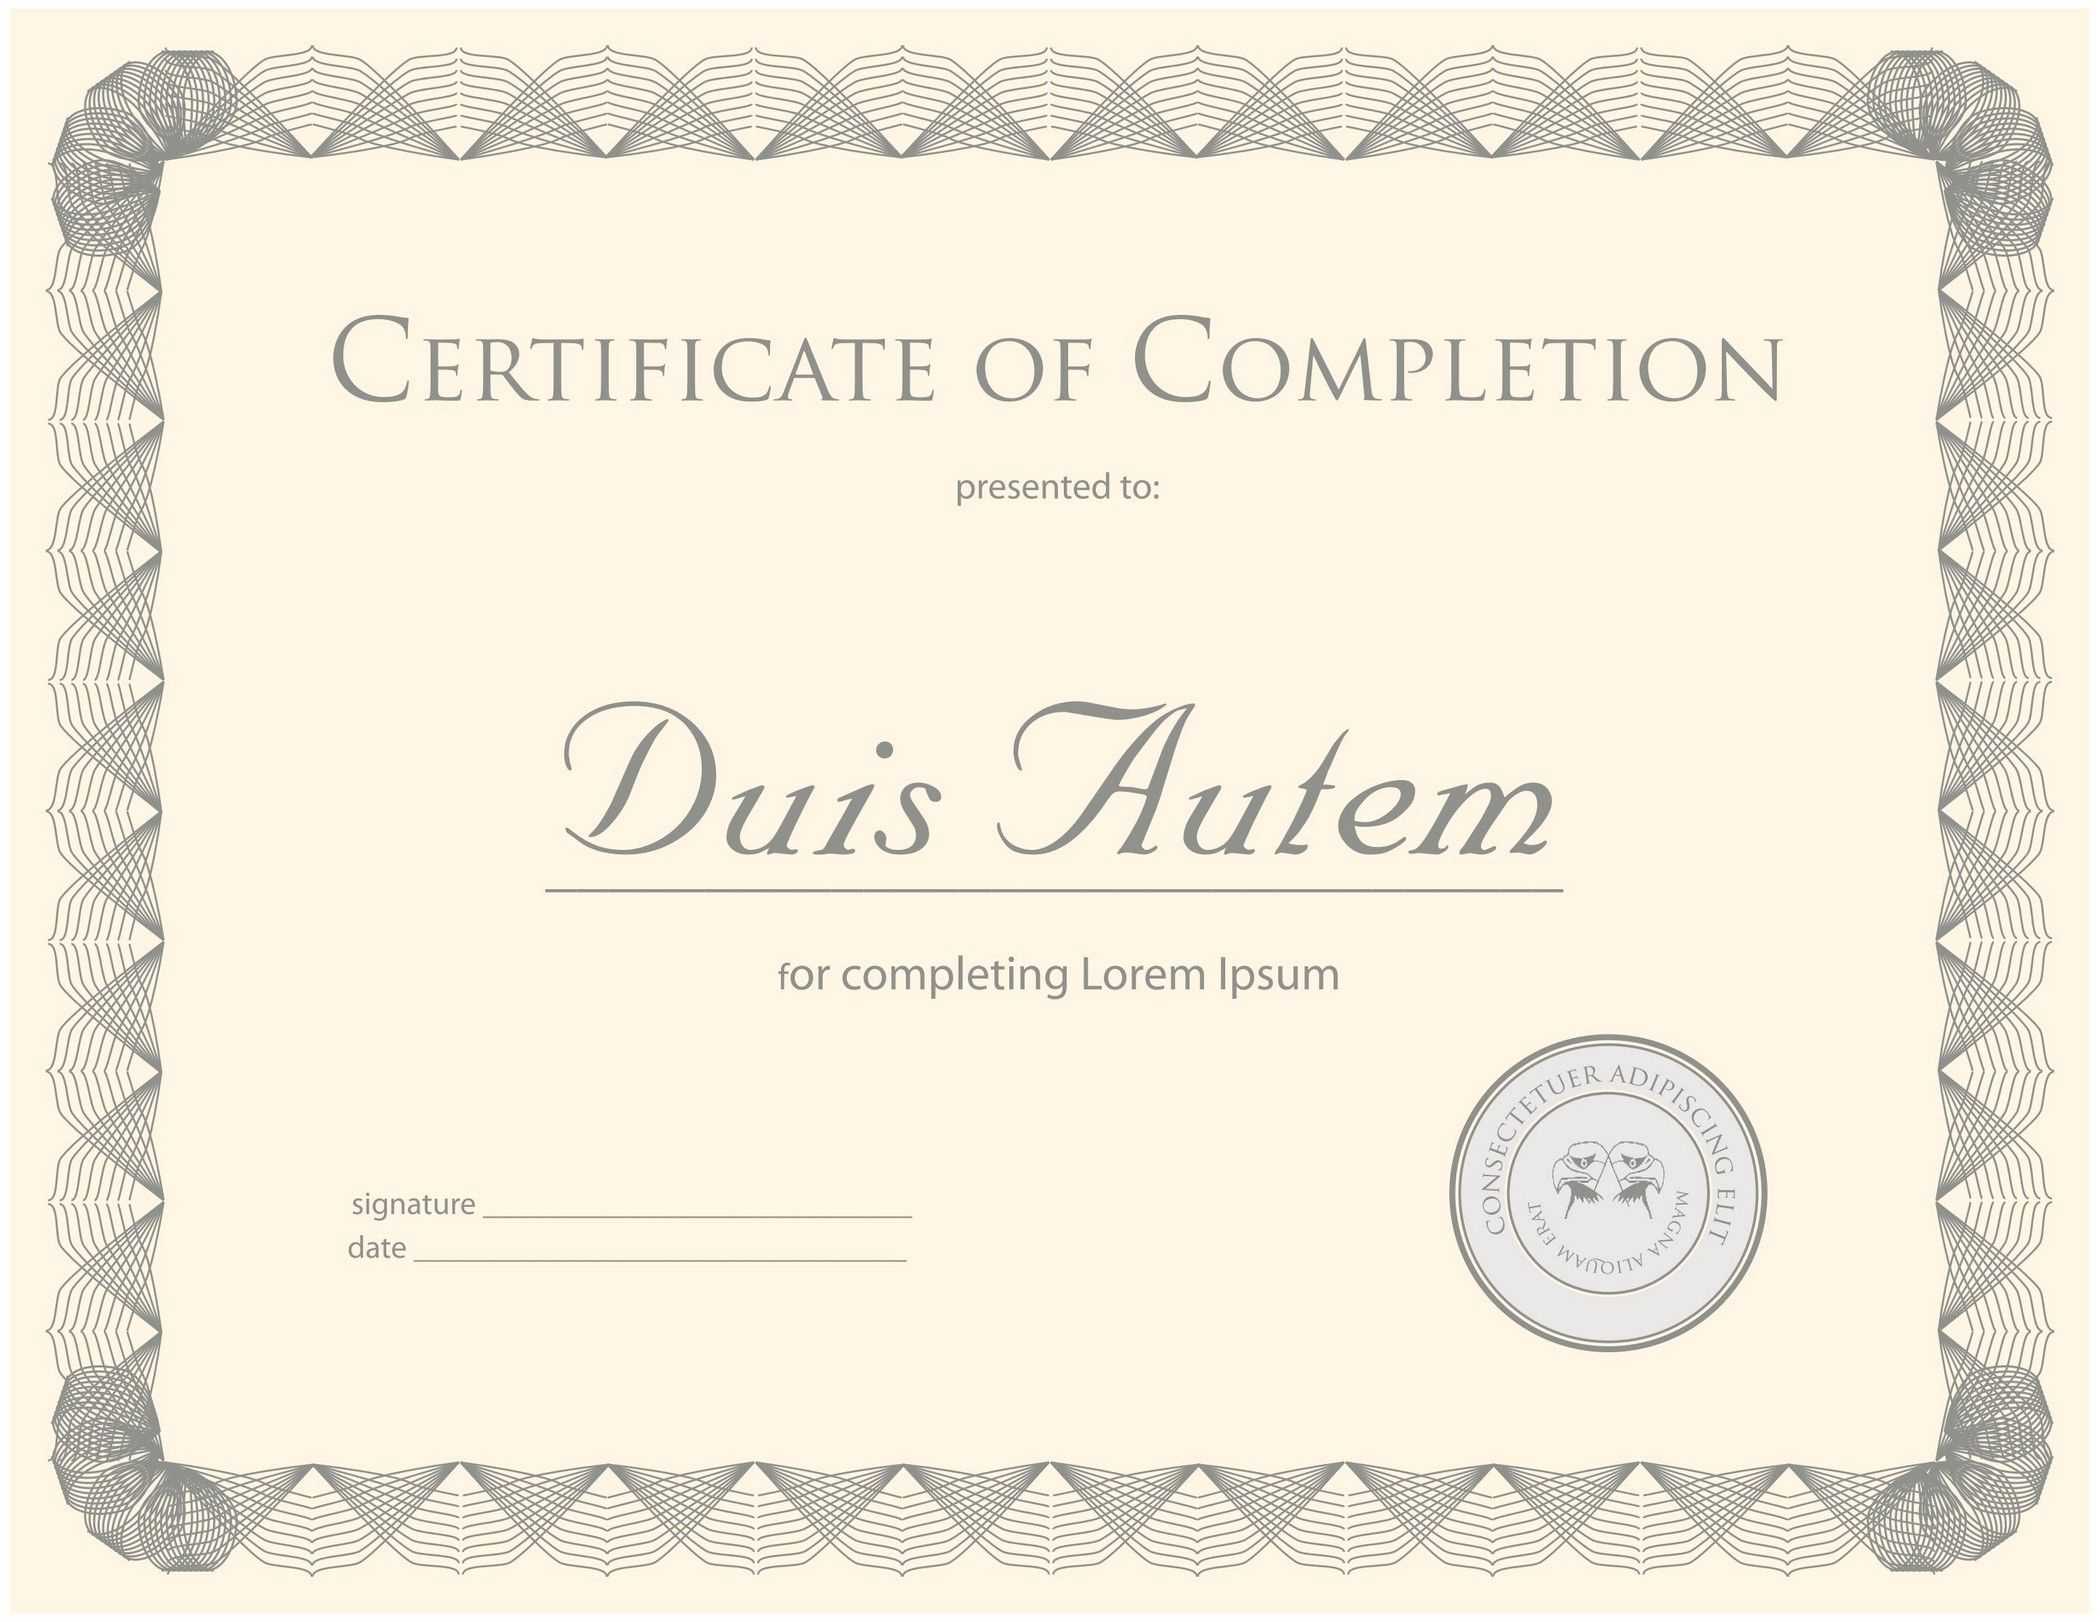 Certificate Templates03 | Norway | Certificate Templates Intended For This Certificate Entitles The Bearer To Template